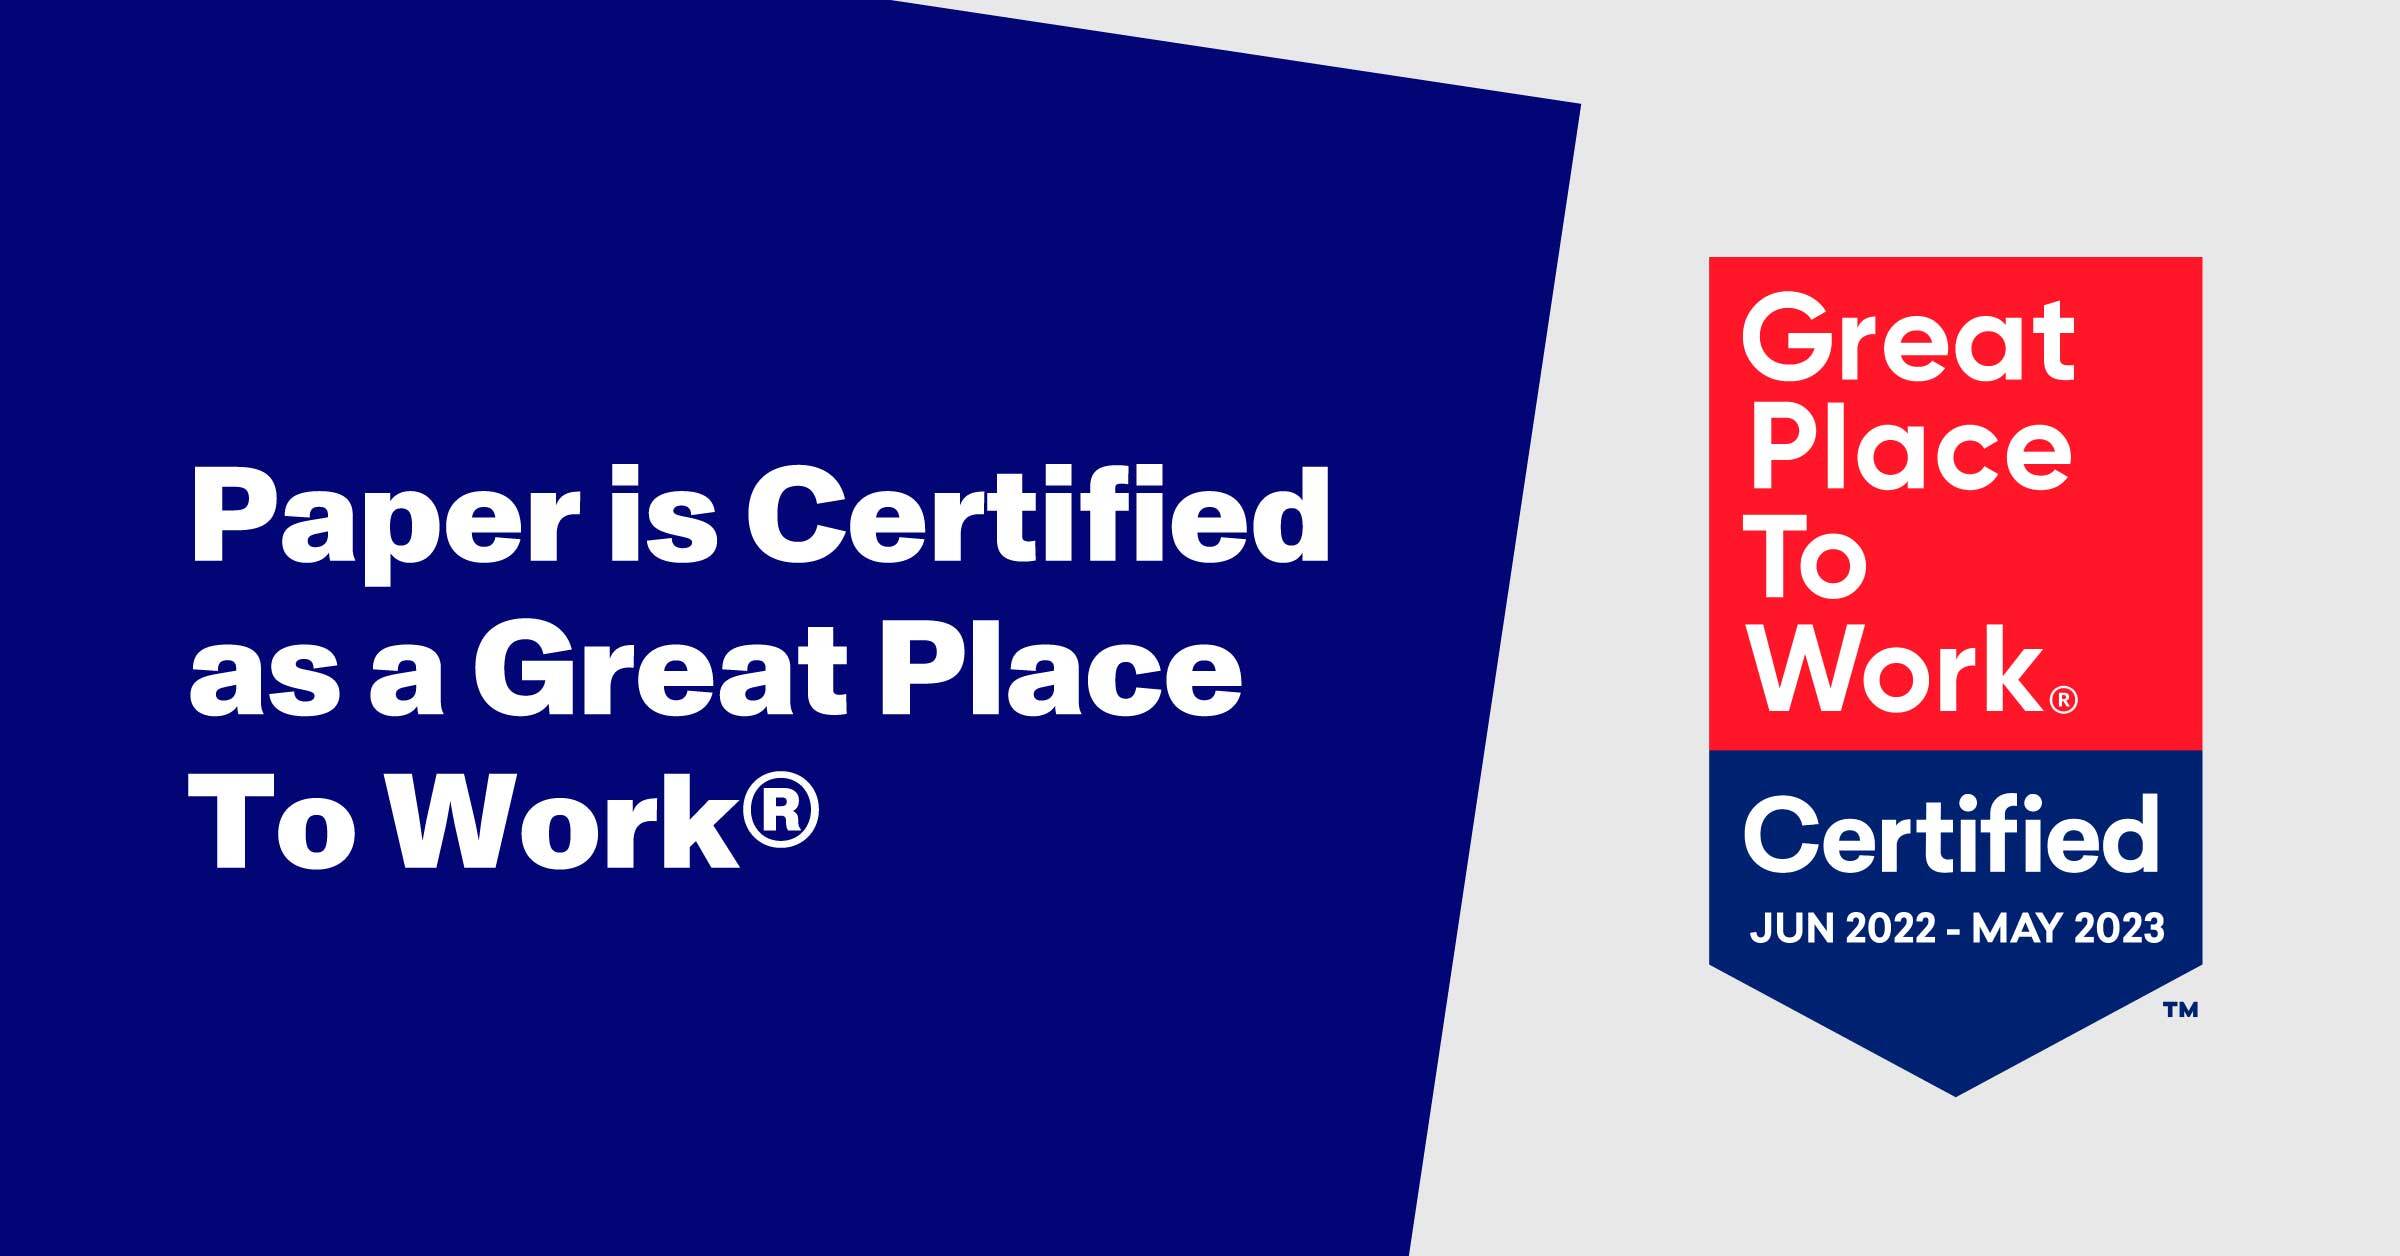 Paper is Certified as a Great Place to Work